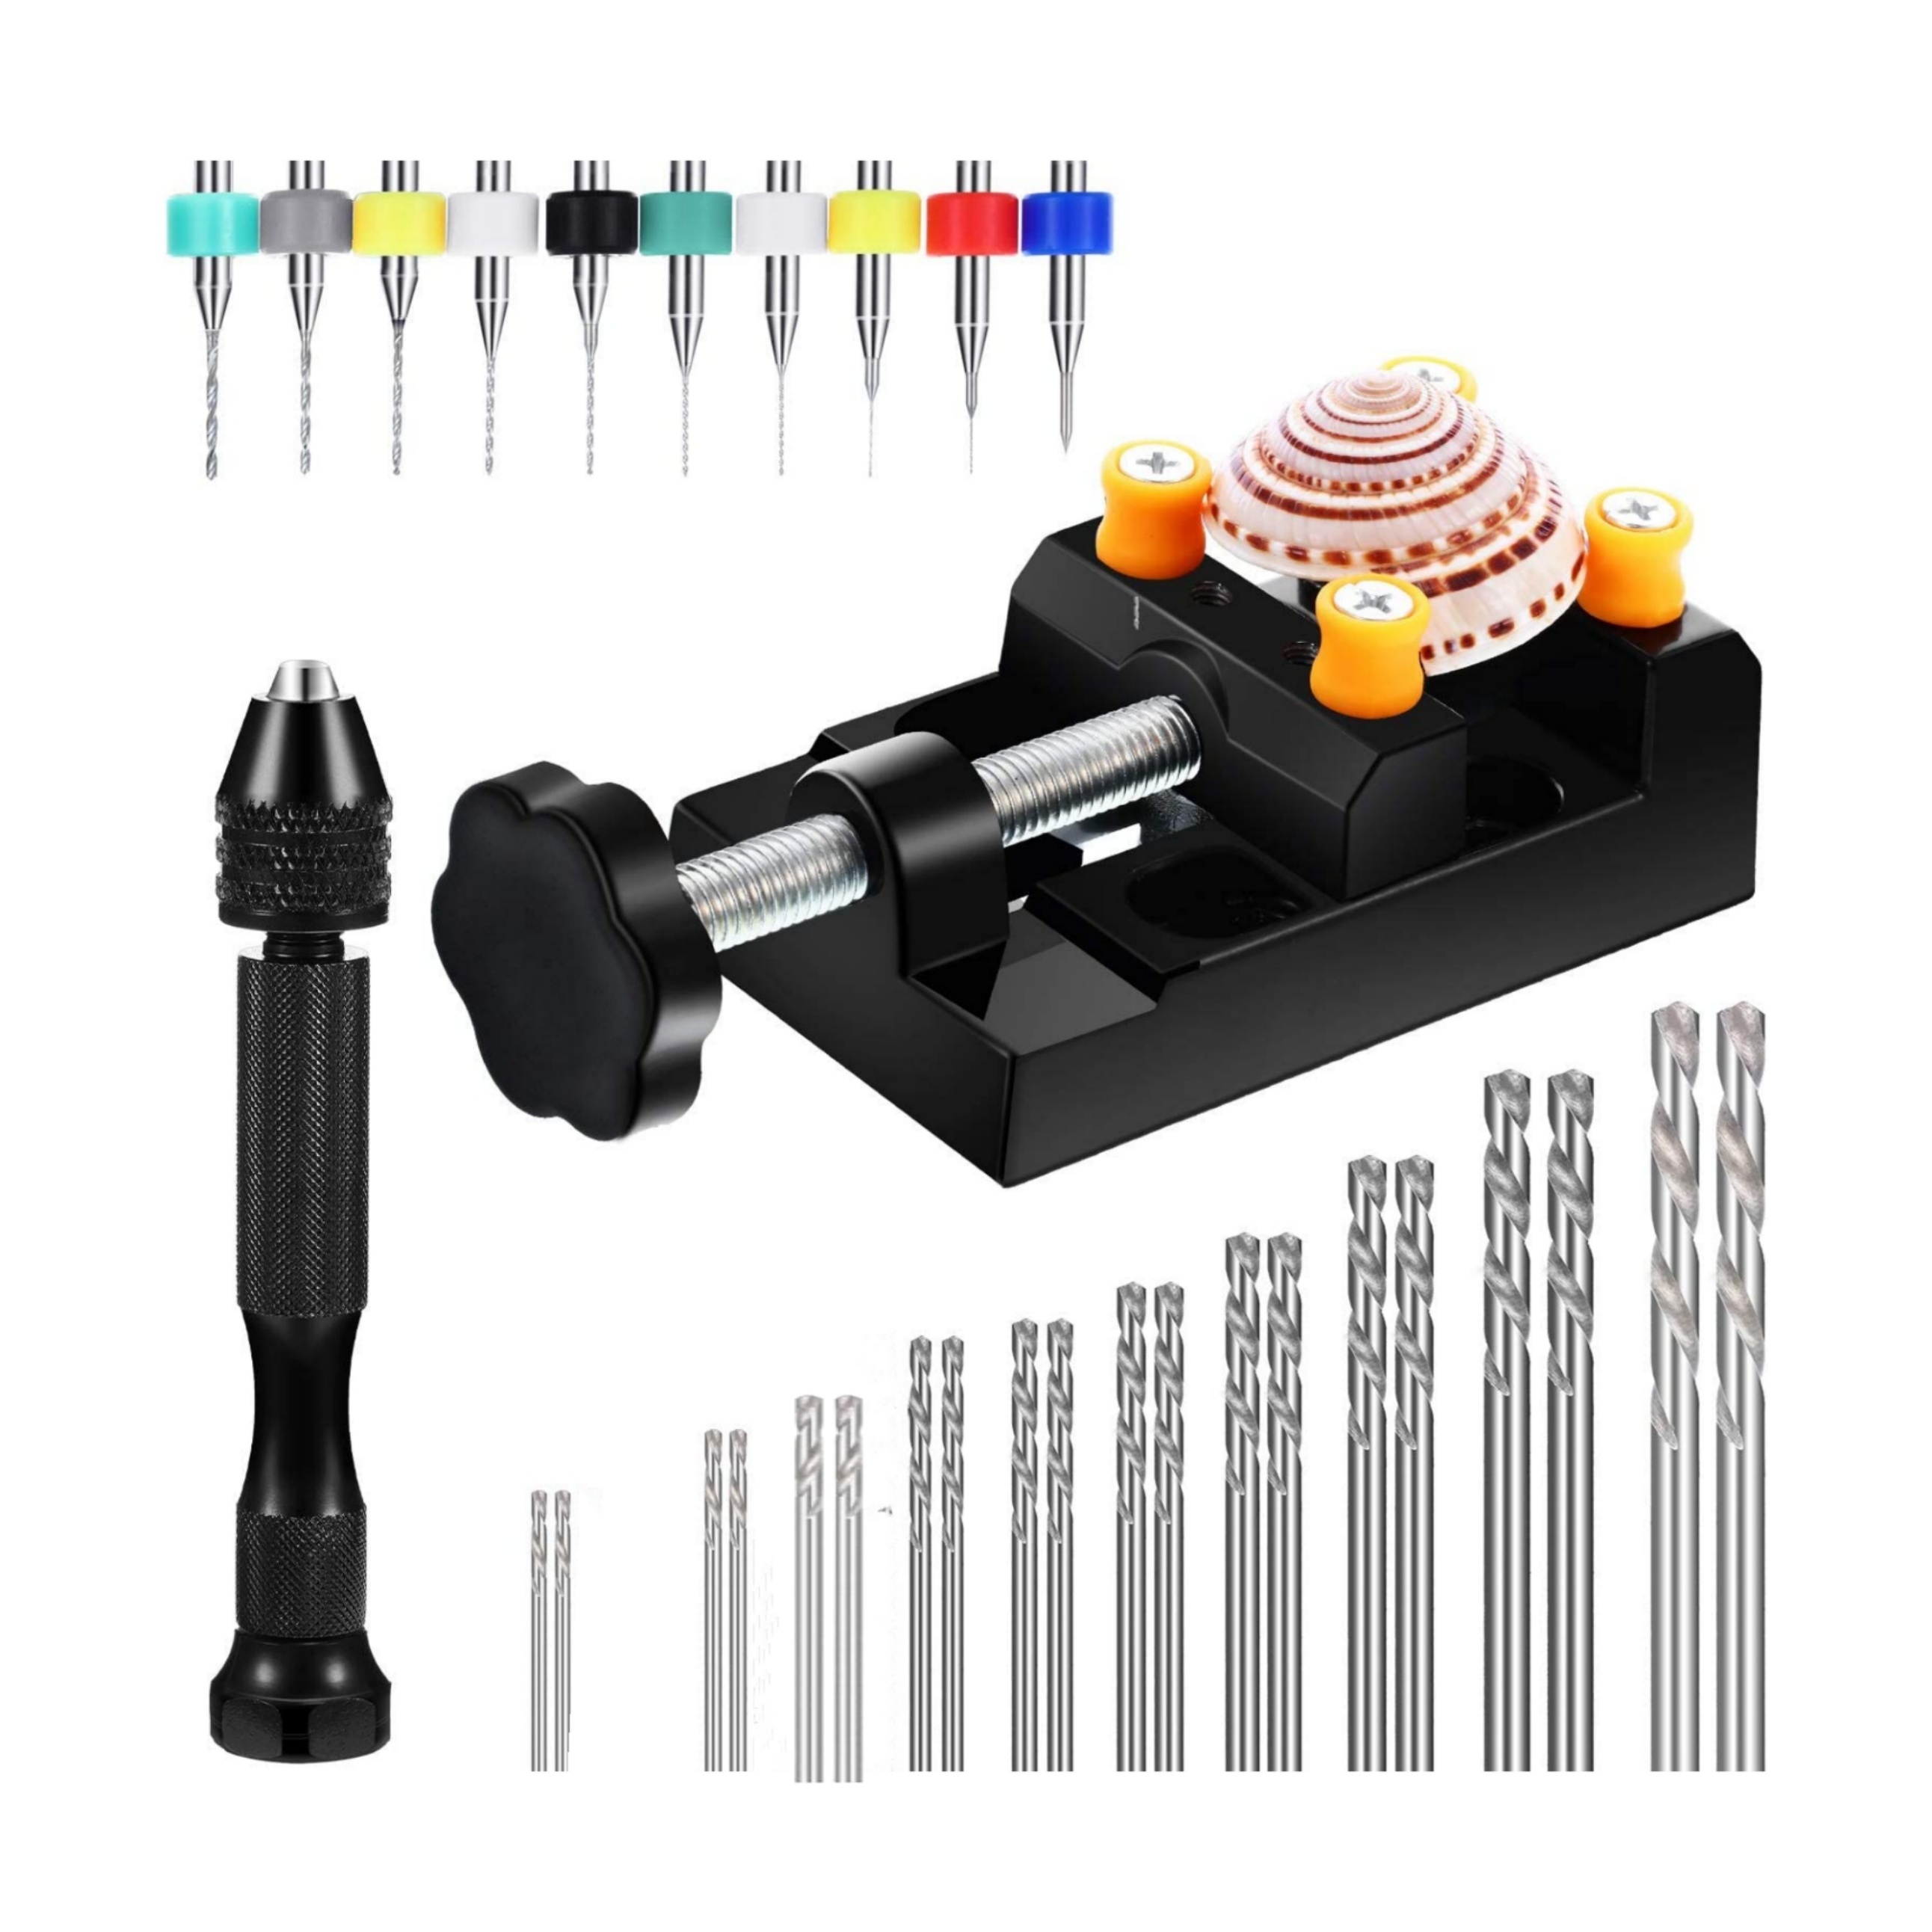 Electric Resin Drill Kit With 10 Bits For Art Jewelry Keychains Casting  Molds And Pin Vise From Camerashome, $25.45